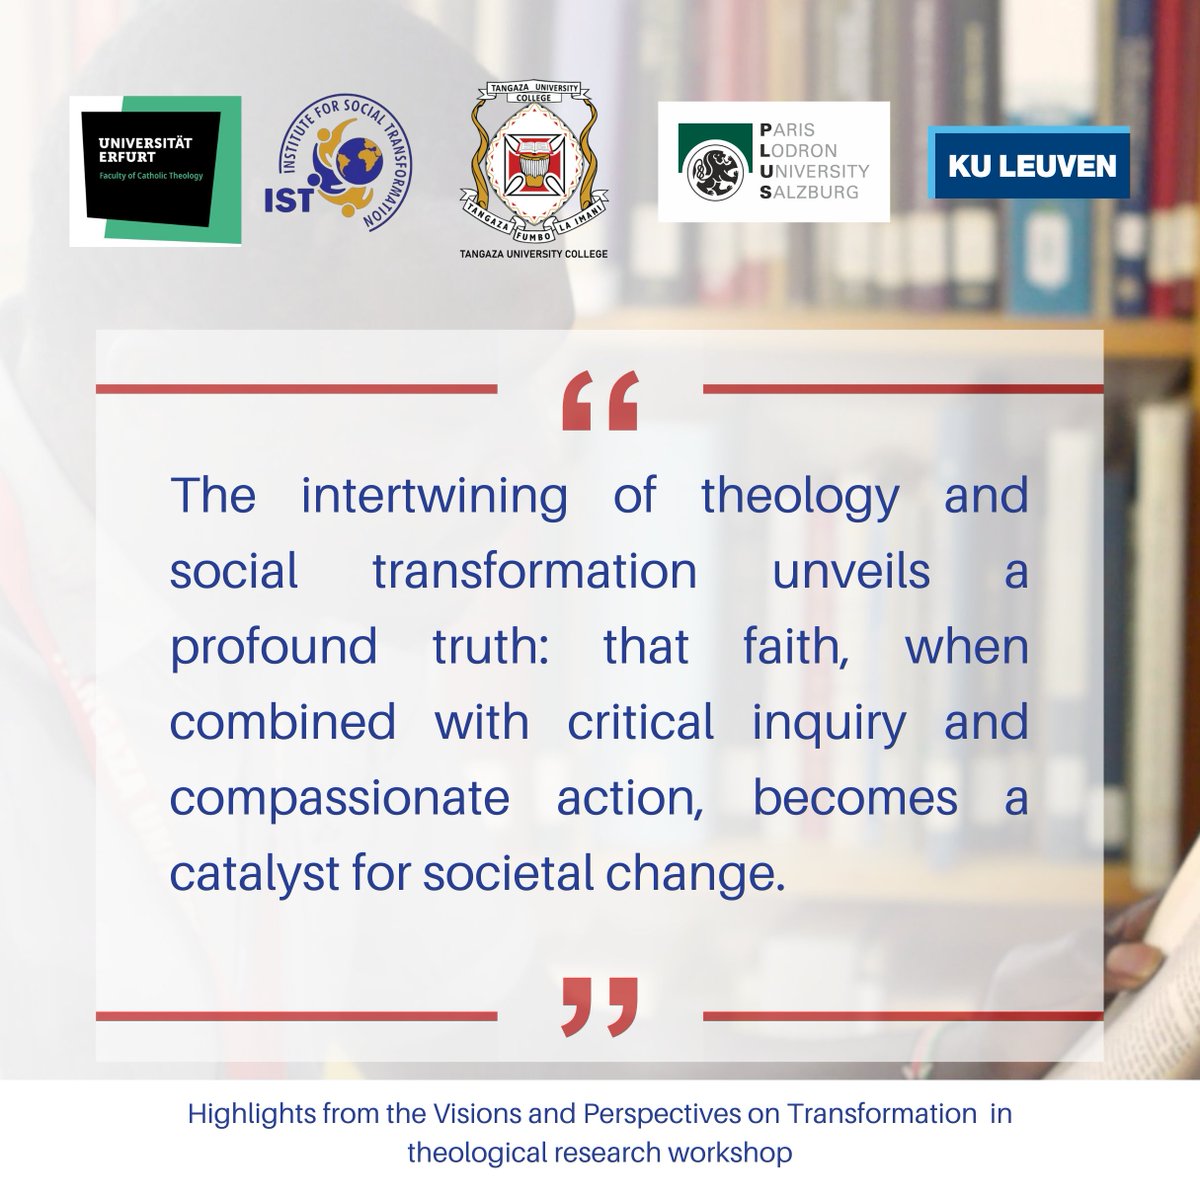 More webinars coming up on Social Transformation. 

Join our PHD seminar on Social Transformation today at 5:30pm here ⤵ 

Zoom link: lnkd.in/dwy_HAUc

#weareIST #socialtransformation #socents #tangazauni